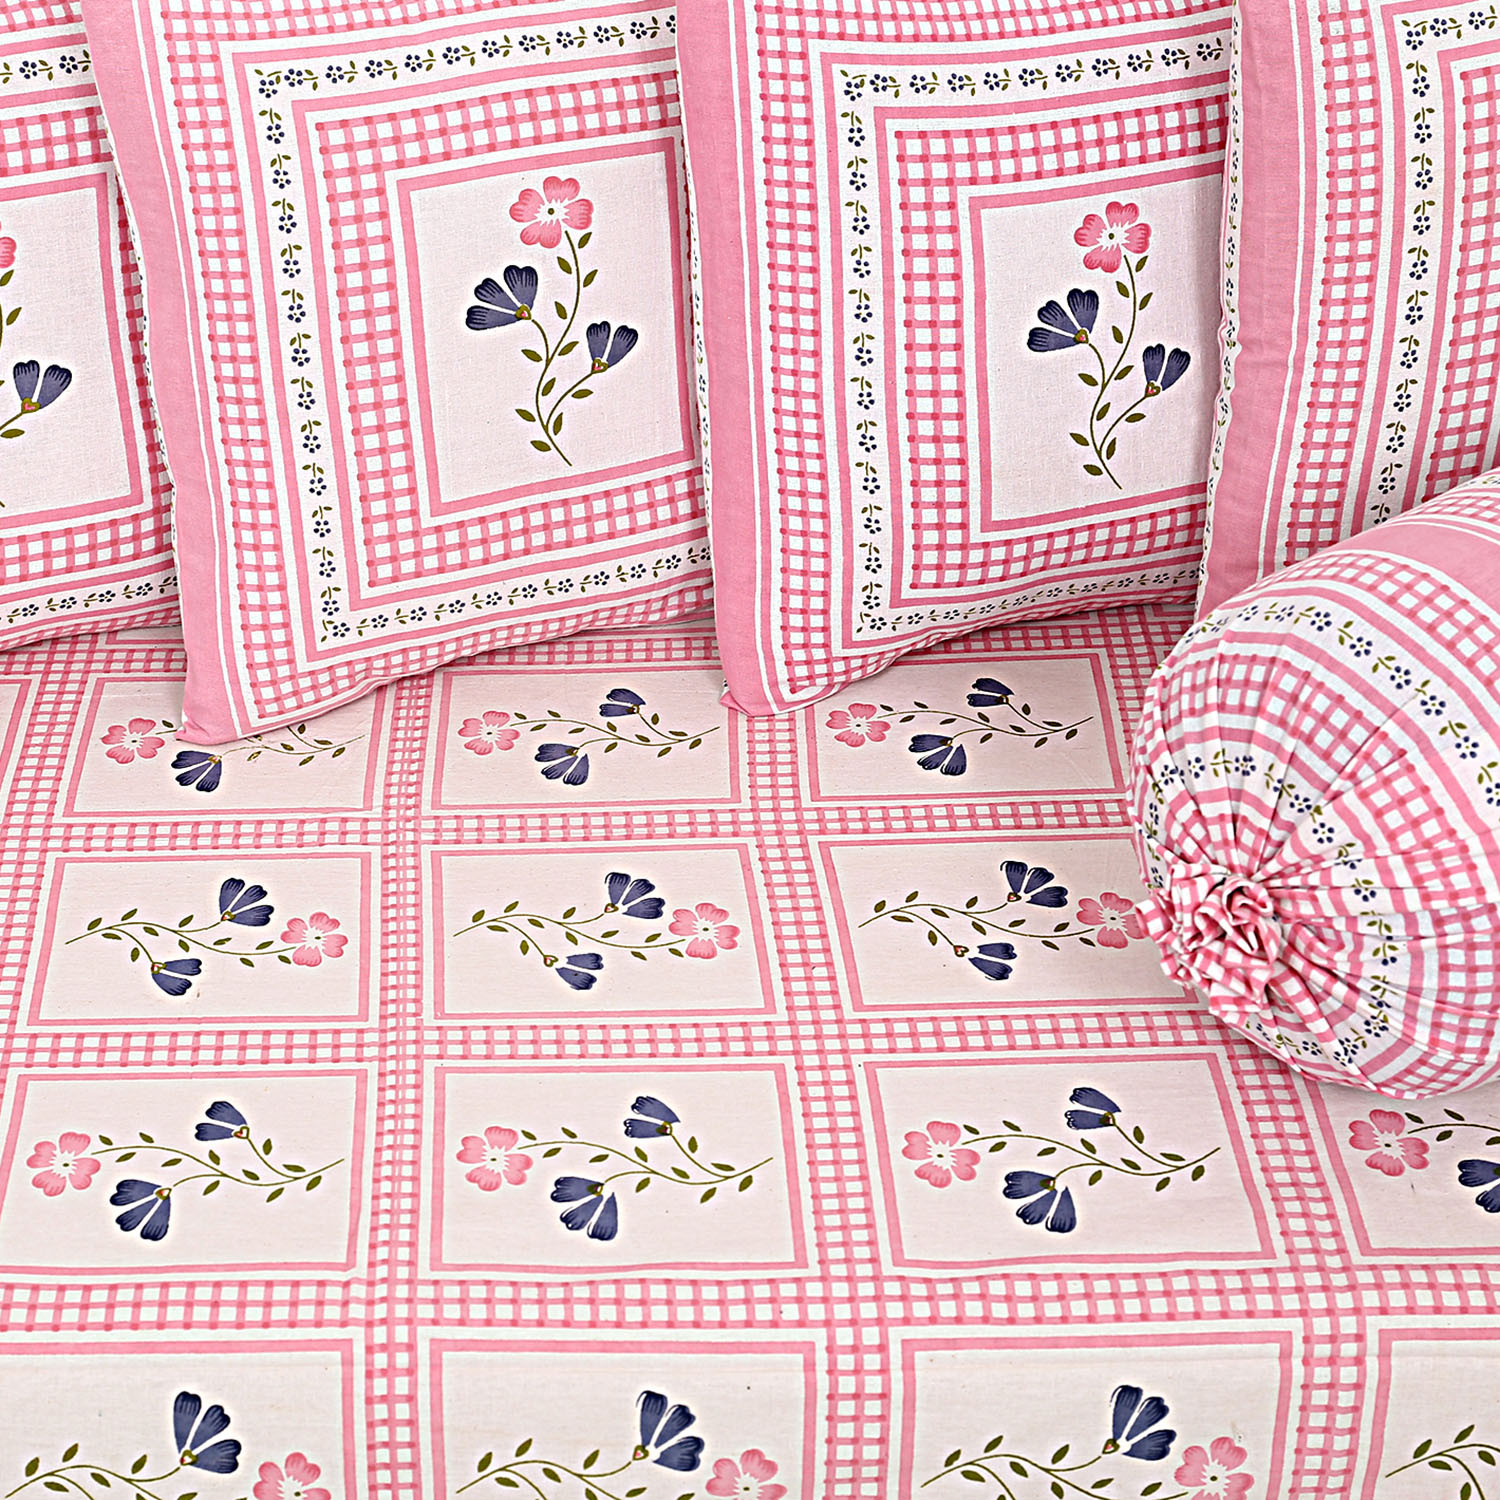 Kuber Industries Floral Design Border Cotton Diwan Set With 8 Pieces (Pink)